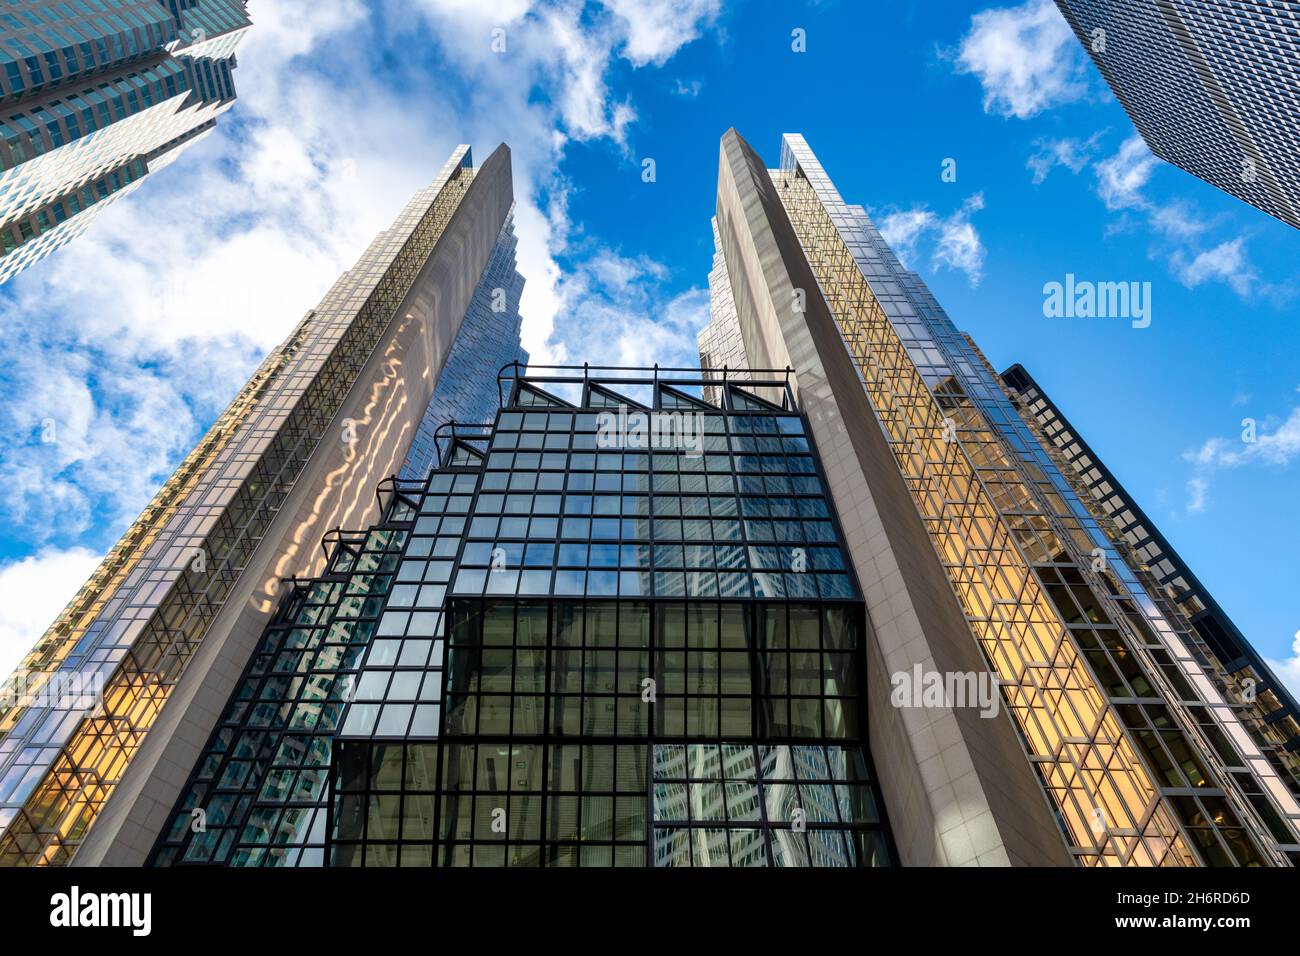 Facade of the Royal Bank Plaza building which serves as the corporate headquarters of the Royal Bank of Canada in Toronto city. Nov. 17, 2021 Stock Photo